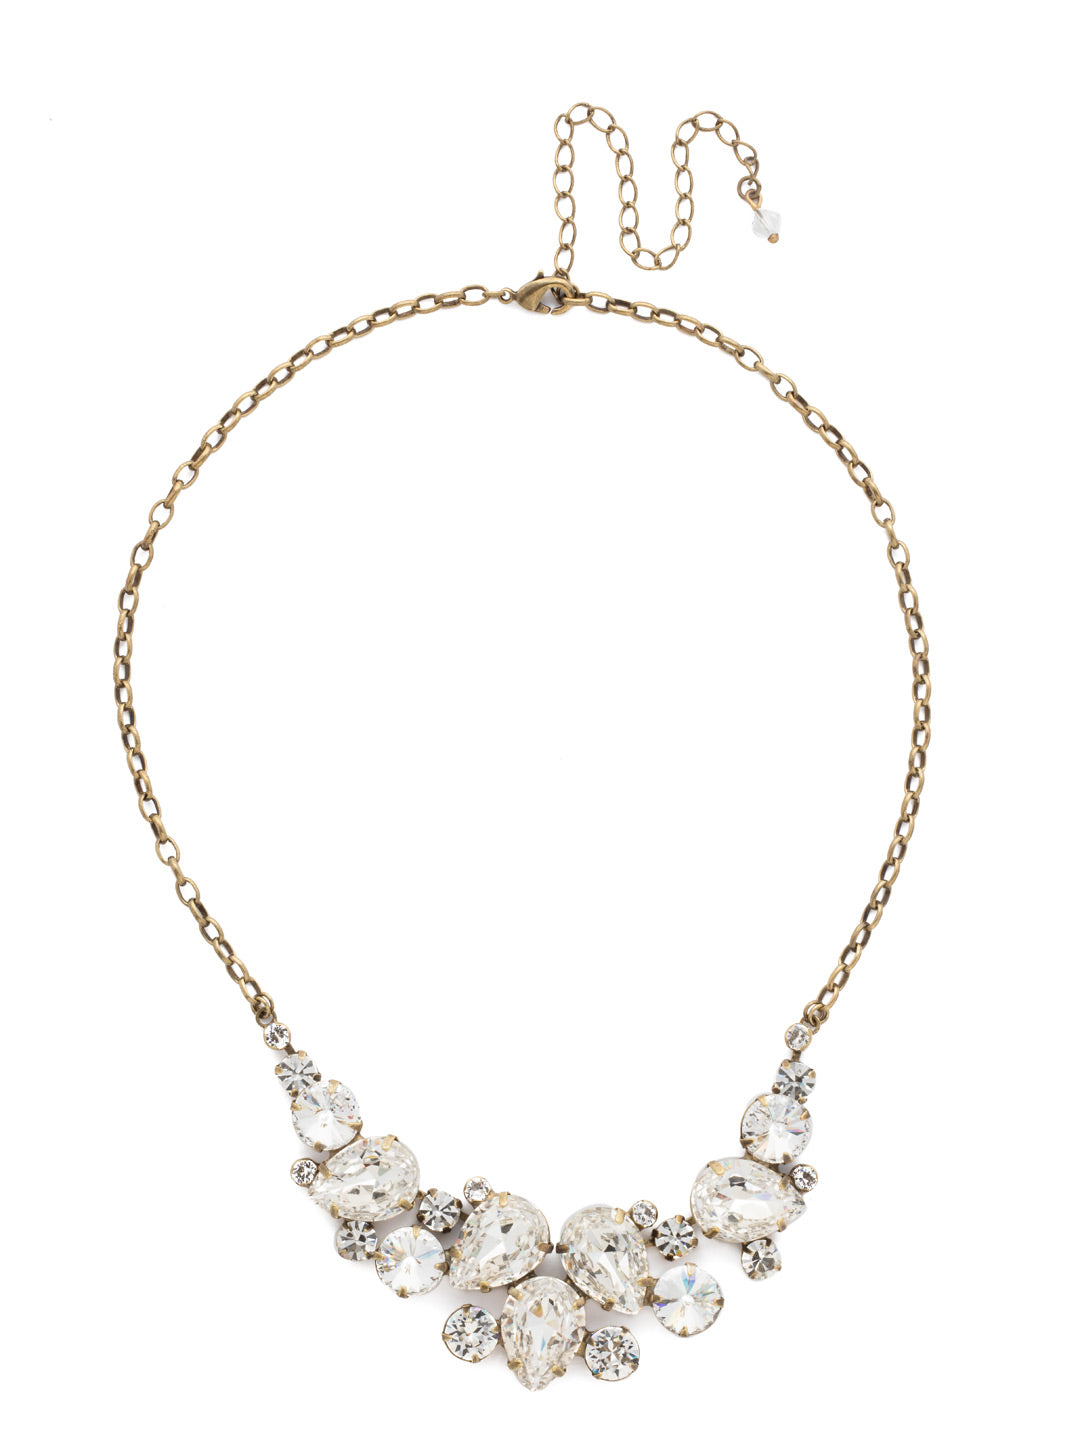 Nested Pear Statement Necklace - NDJ14AGCRY - <p>Our Nested Pear Statement Necklace is the perfect addition to any outfit. With a lot of sparkle packed into a sleek unique crystal necklace, sport this style to any and all of life's occasions! From Sorrelli's Crystal collection in our Antique Gold-tone finish.</p>